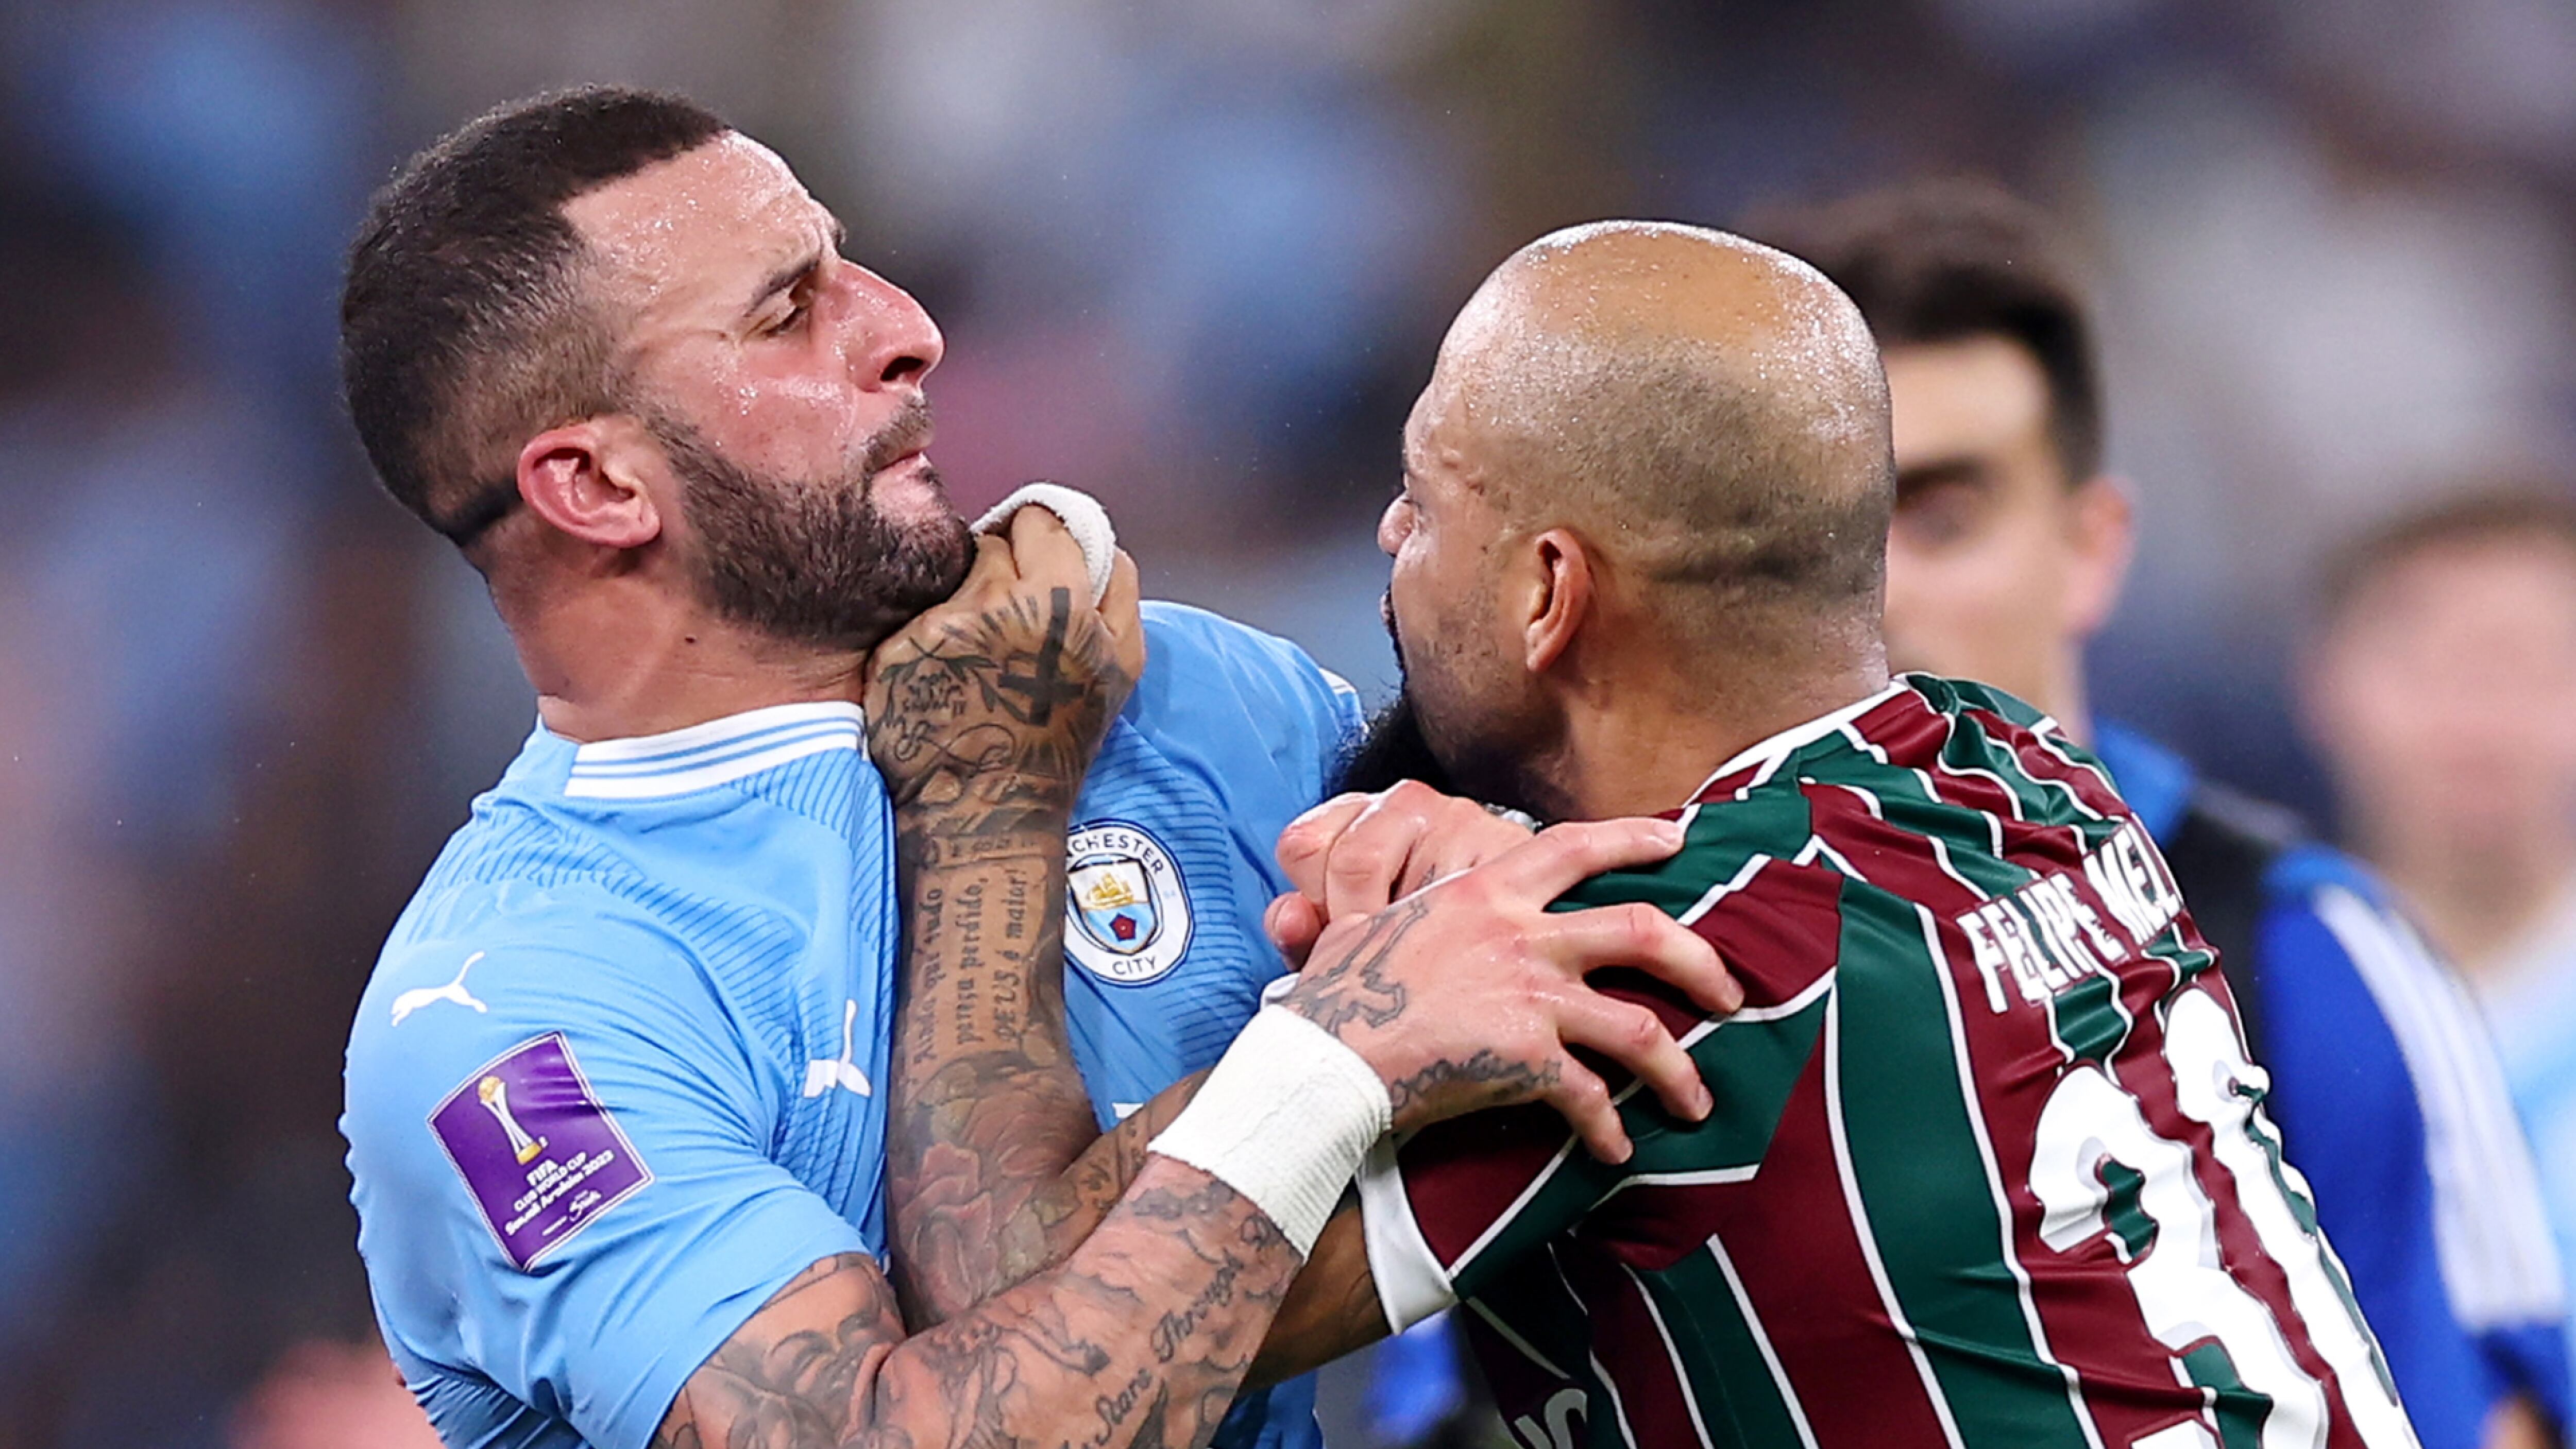 Football is over and boxing has begun, Felipe Melo and Kyle Walker finish the World Cup final with blows